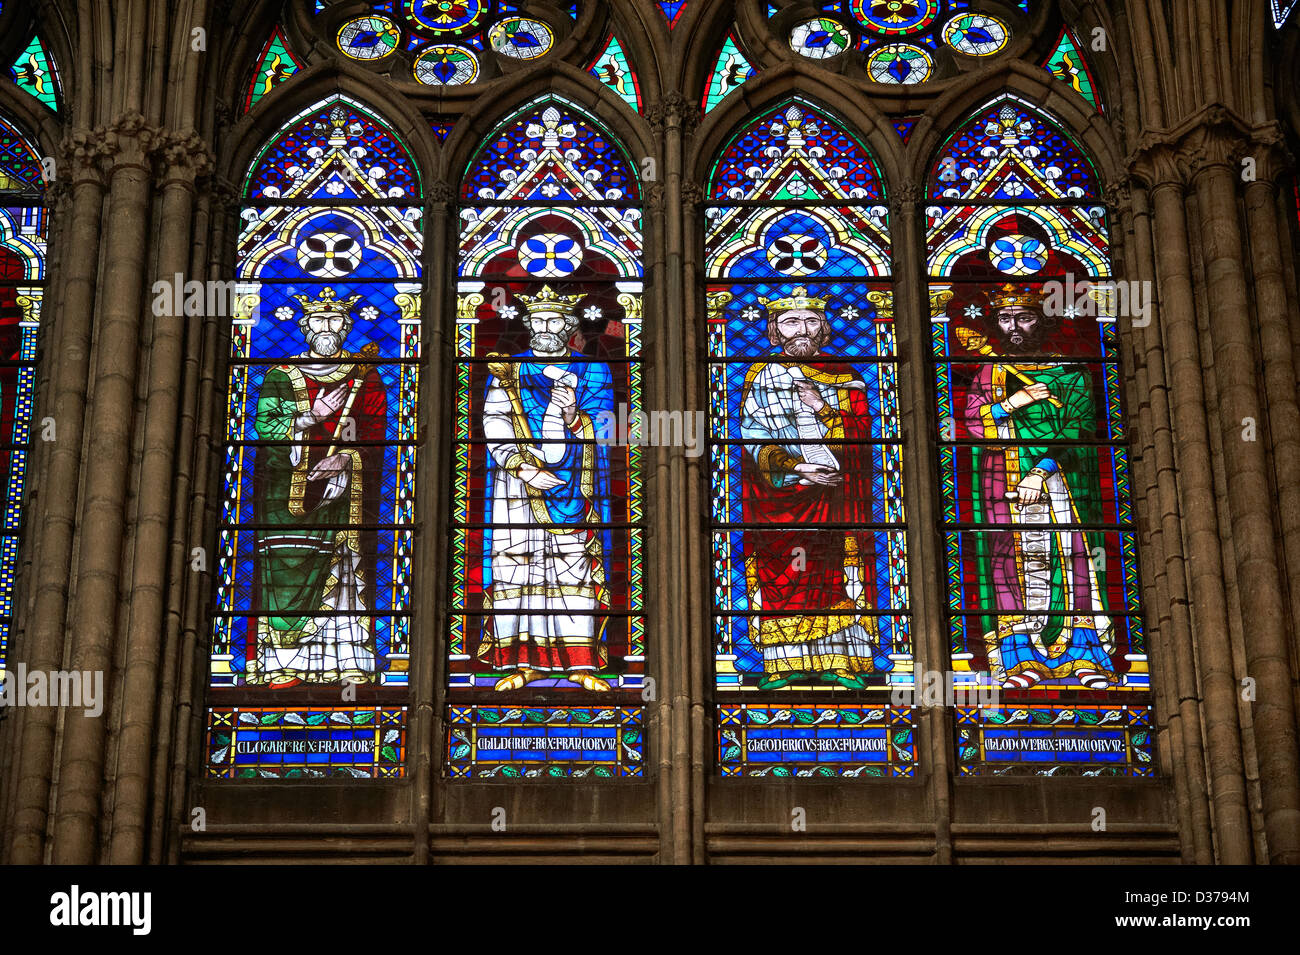 Medieval Gothic stained glass window showing the Kings of France. The  Cathedral Basilica of Saint Denis Paris France Stock Photo - Alamy